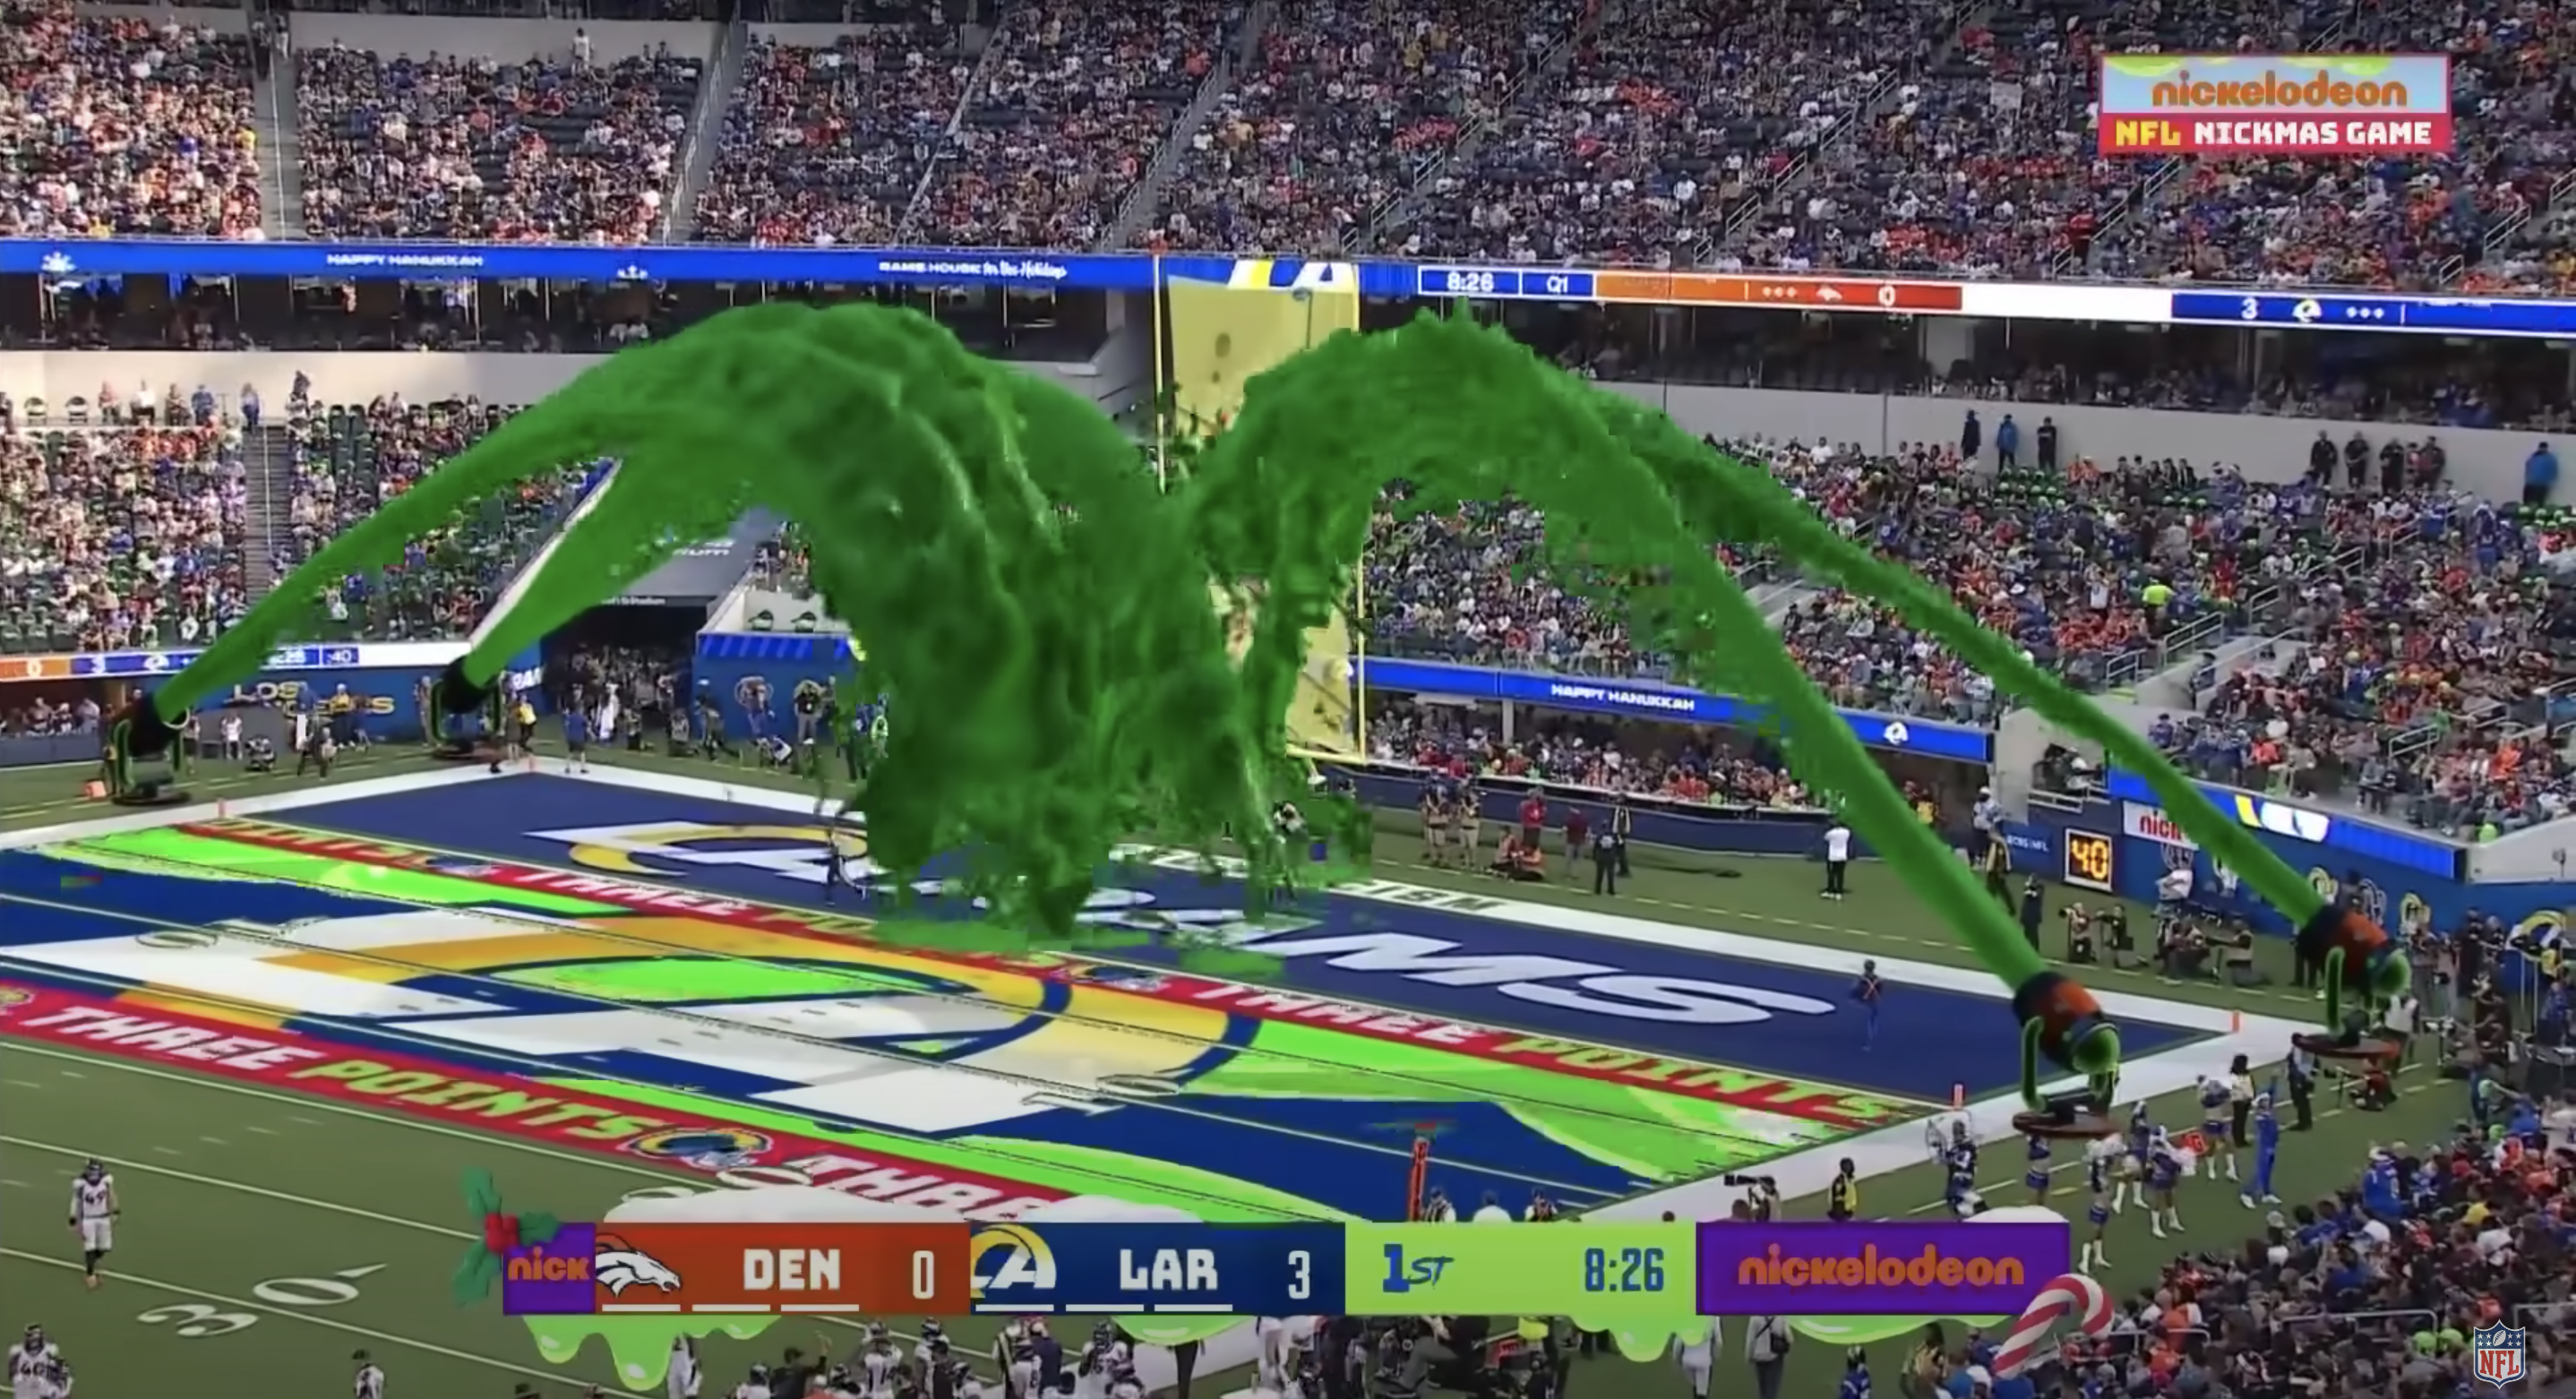 Nickelodeon's Super Bowl broadcast: an ingenious, wildly chaotic splash, Super Bowl